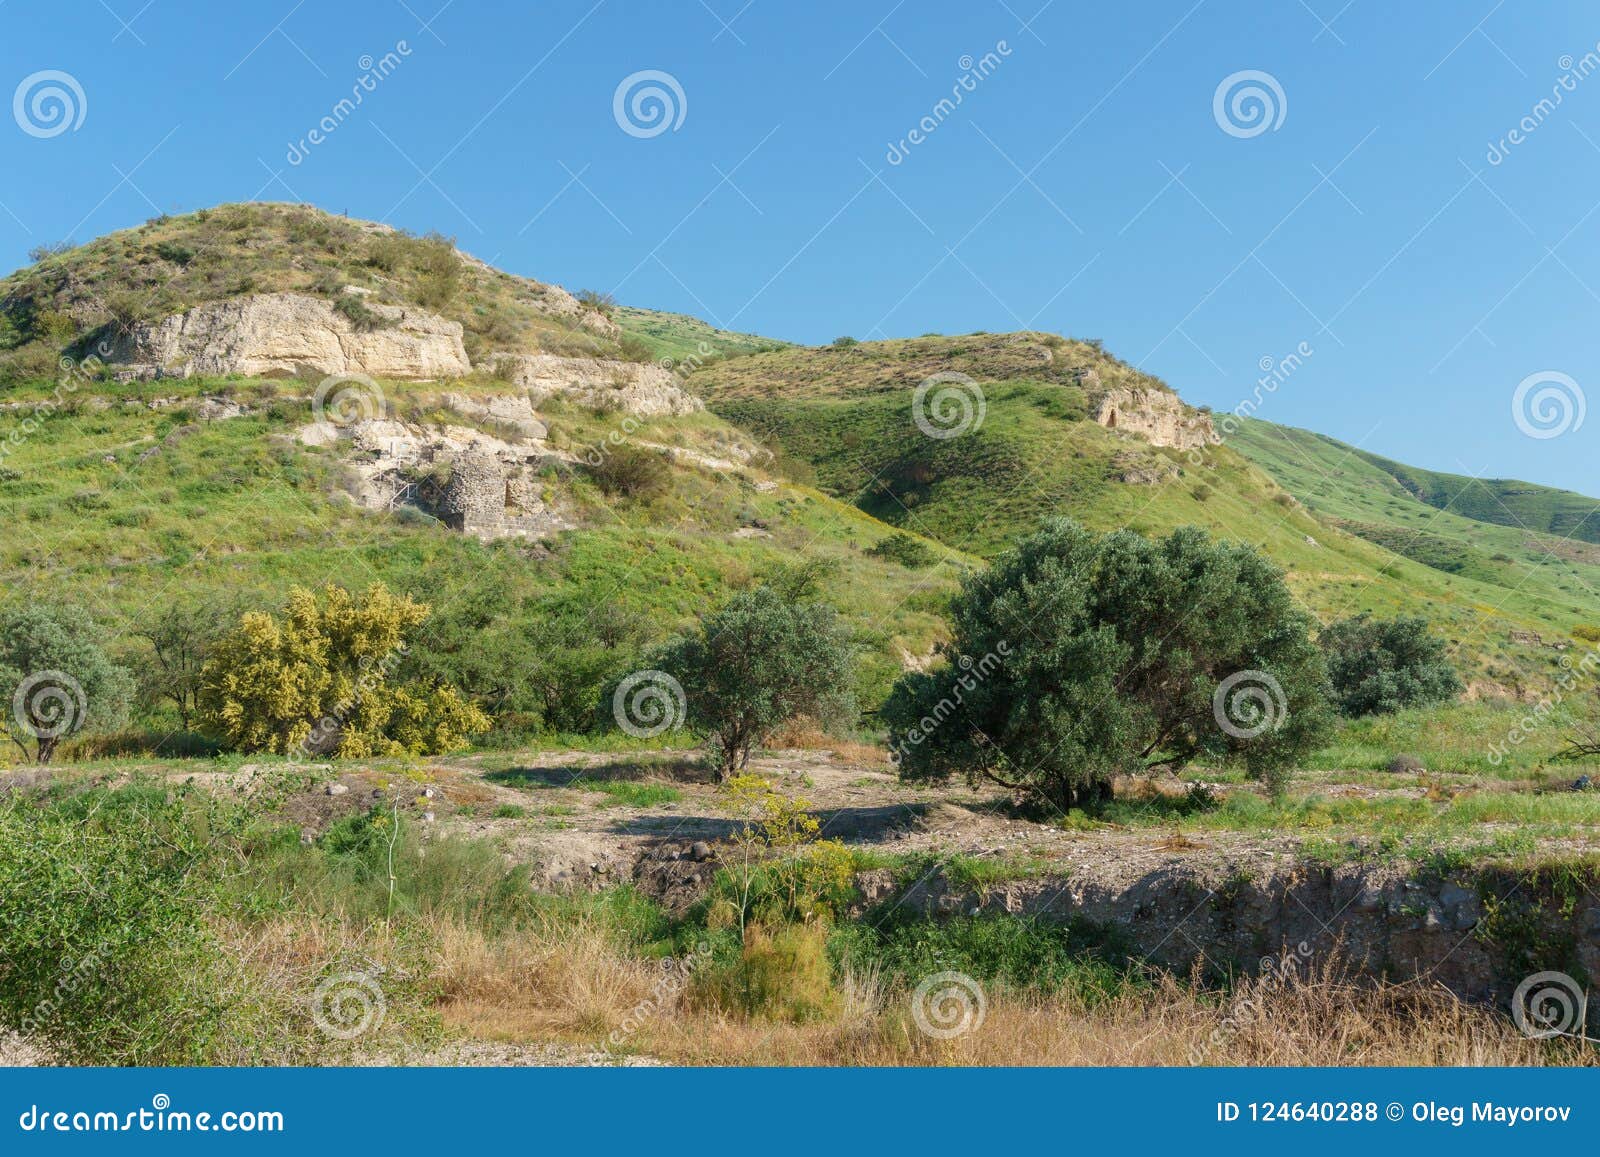 golan heights, israel - march 31, 2018: kursi national park impressive remains of a monastery and church